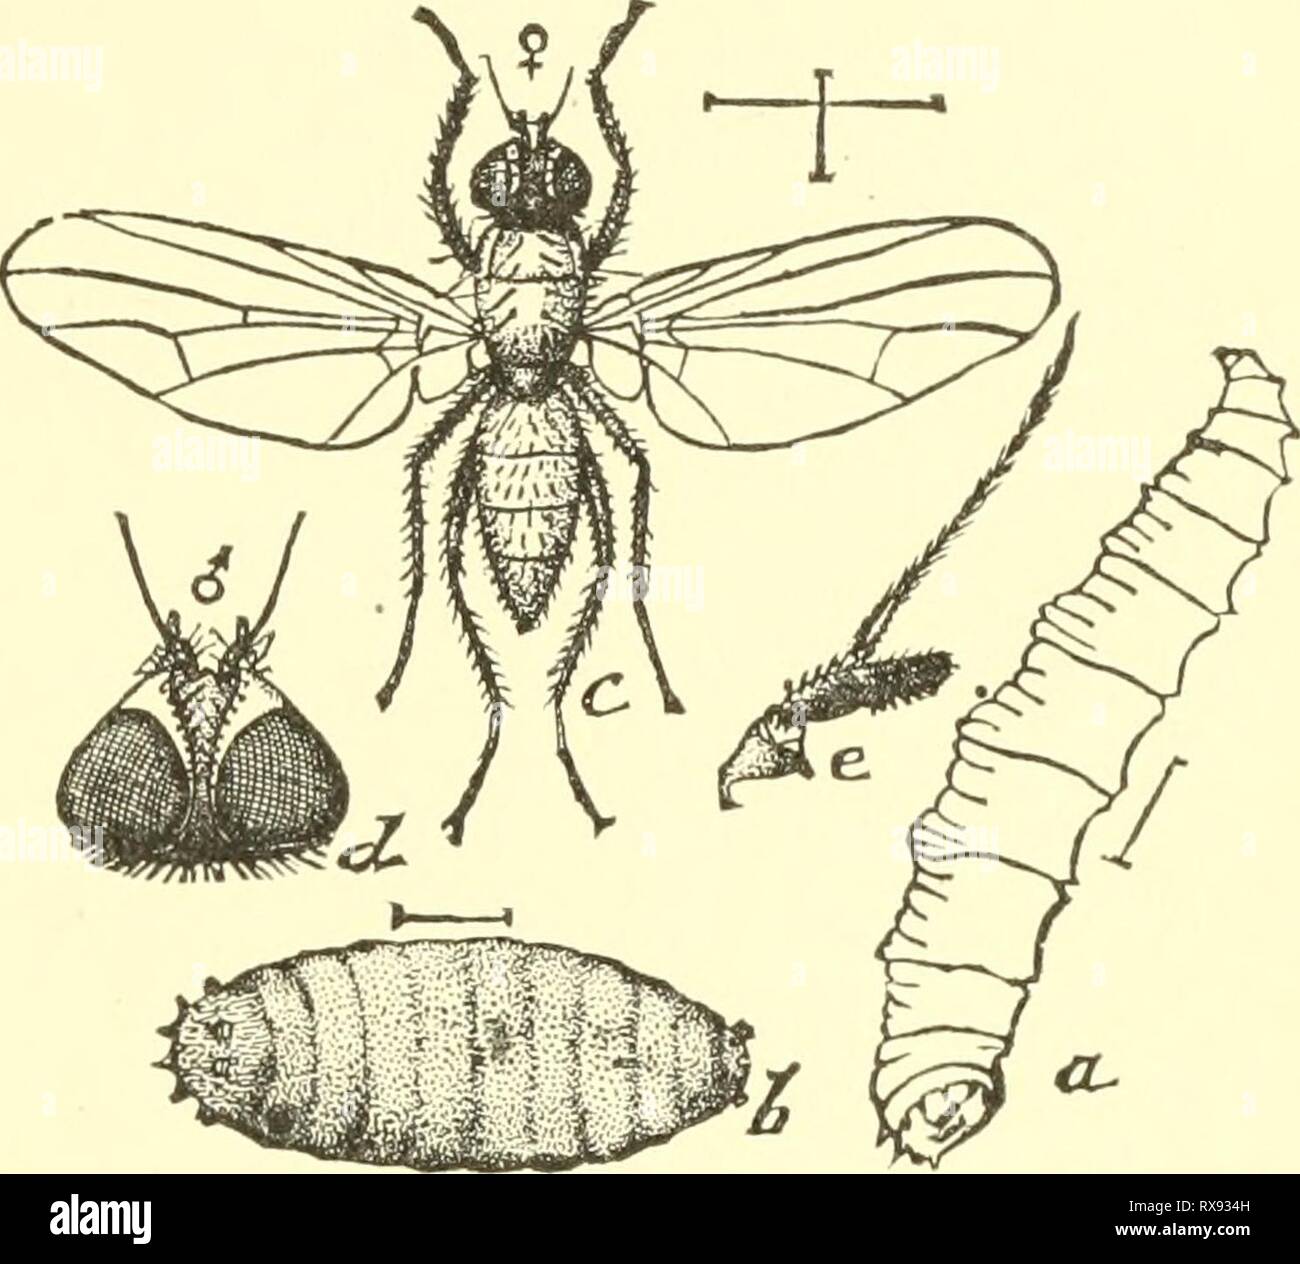 Economic entomology for the farmer Economic entomology for the farmer and the fruit grower, and for use as a text-book in agricultural schools and colleges; economicentomolo00smit Year: 1906  THE INSECT WORLD. 361   Cabbage-maggot, Phorbia brassiccp.—a, larva ; b, pupa c, adult; d, its head ; e, antenna. injurious to cabbage and cauliflower, as well as to onions, rad- ishes, turnips, beets, and other root crops, while other species attack planted seeds like those of melons ^'^- 4i9- and even corn. Oc- casionally, instead of attacking roots, the maggots are found boring in thick or fleshy leave Stock Photo